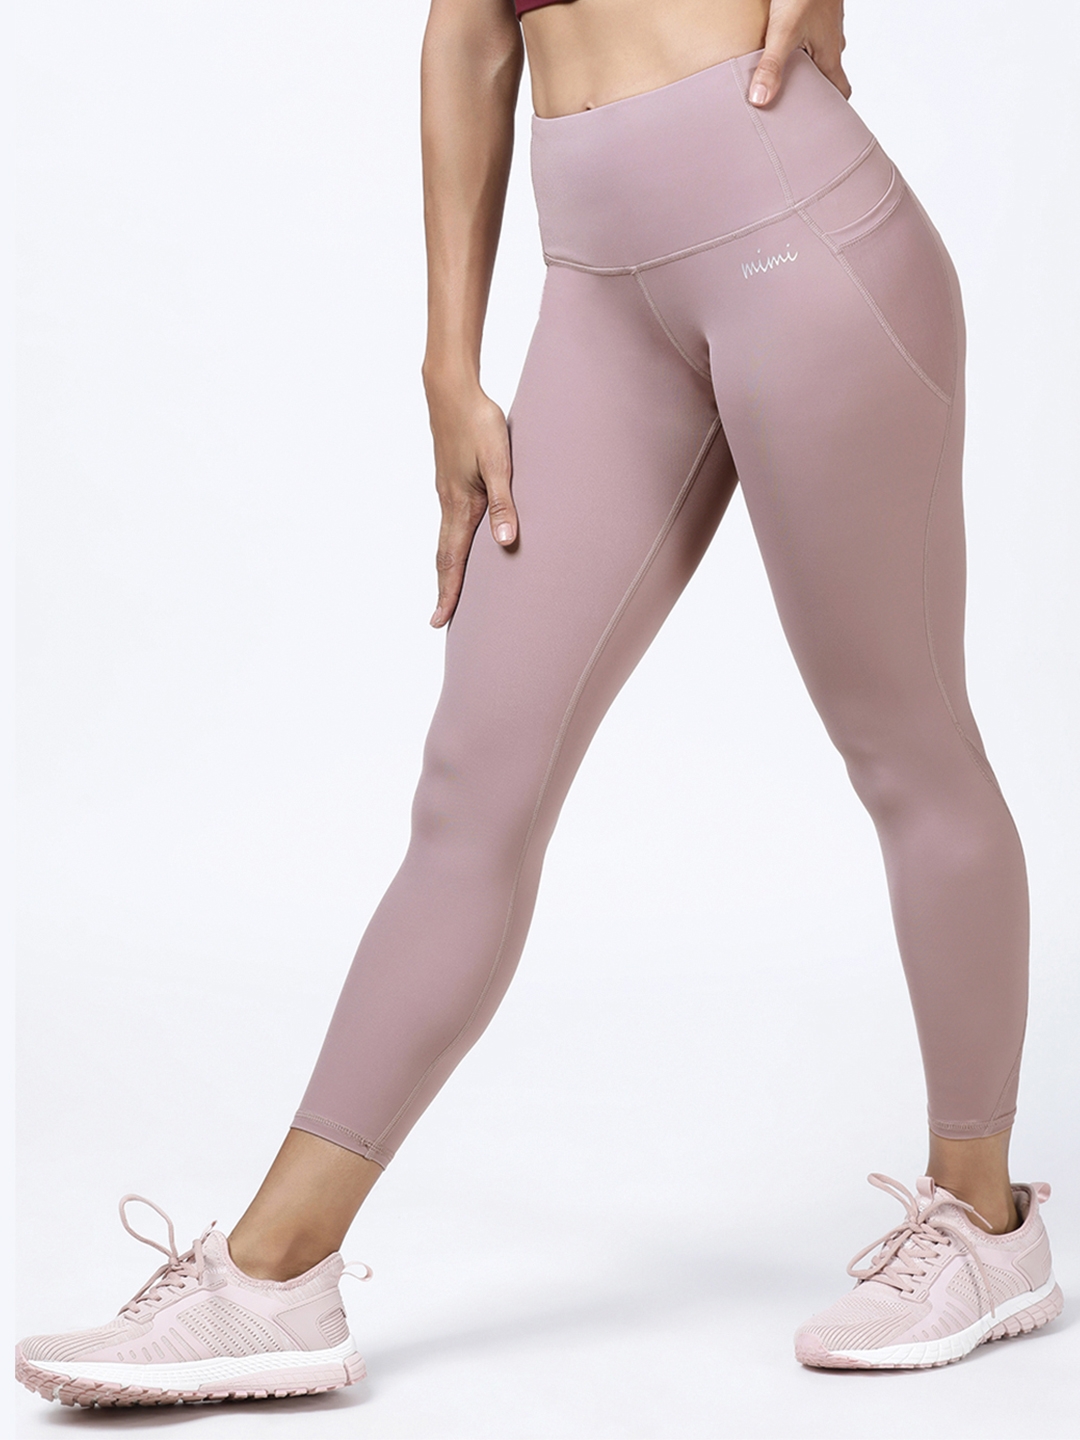 High Waist Full Length Leggings for women with High Impact Core Support - Lavender